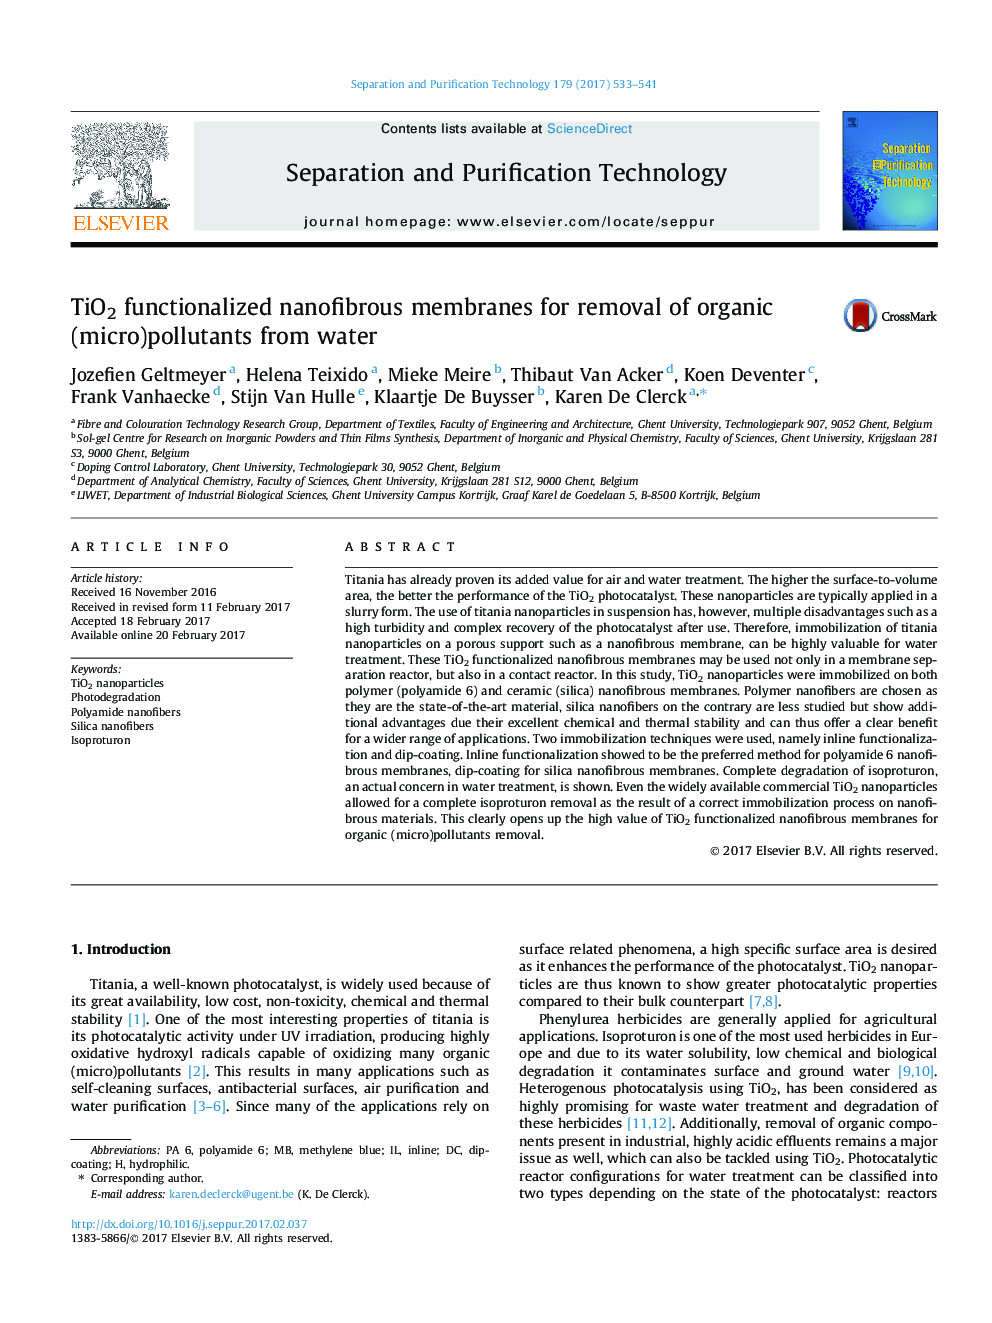 TiO2 functionalized nanofibrous membranes for removal of organic (micro)pollutants from water